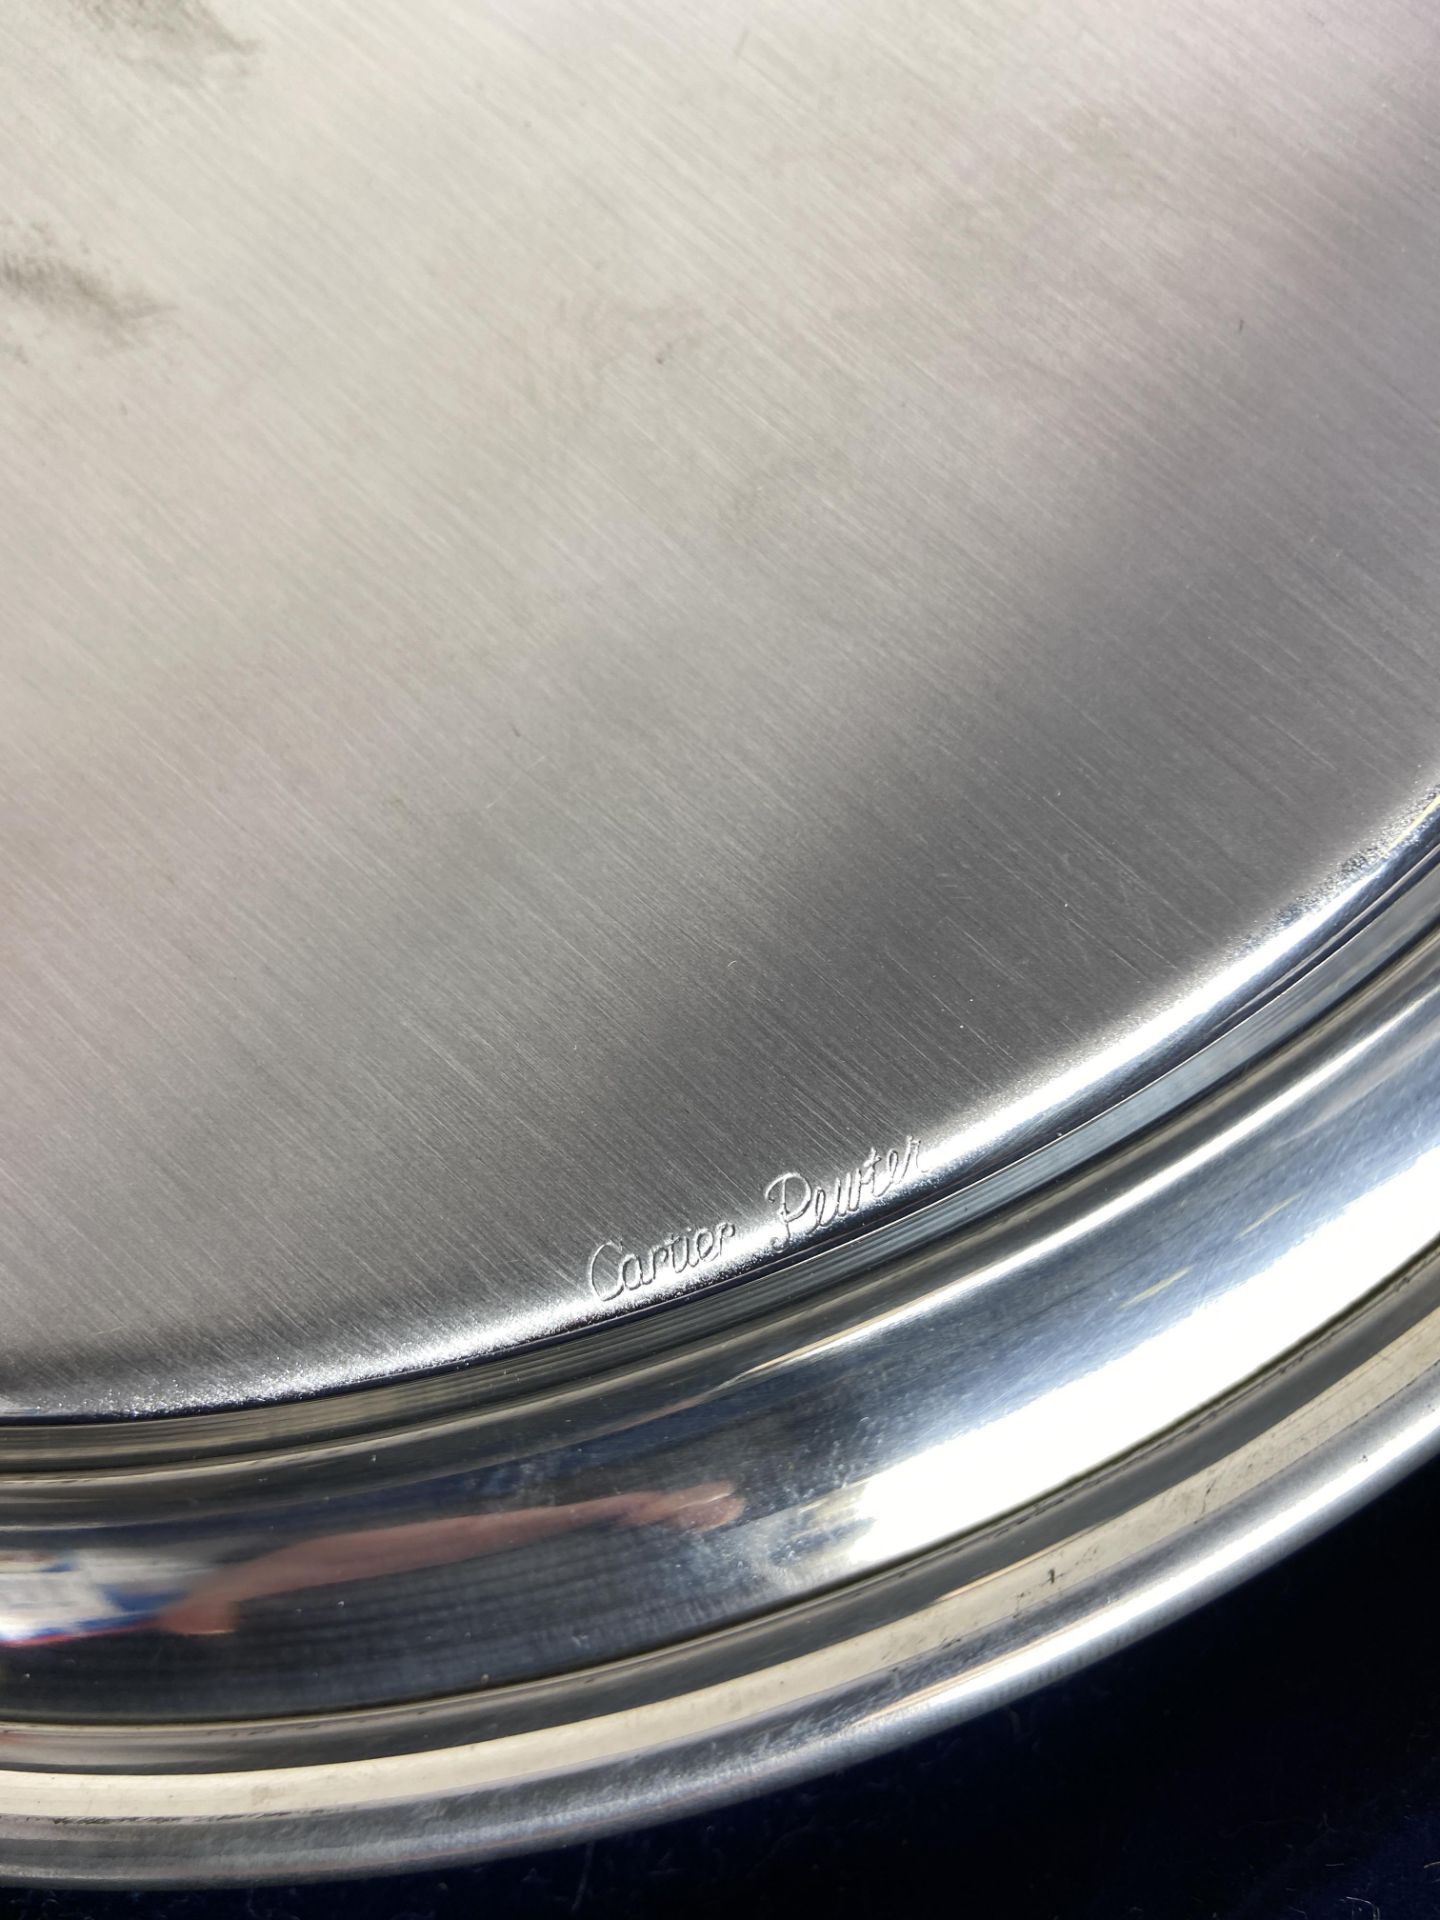 1970's Cartier Polished Pewter Platter in Box and with Dust Cover - Image 4 of 6